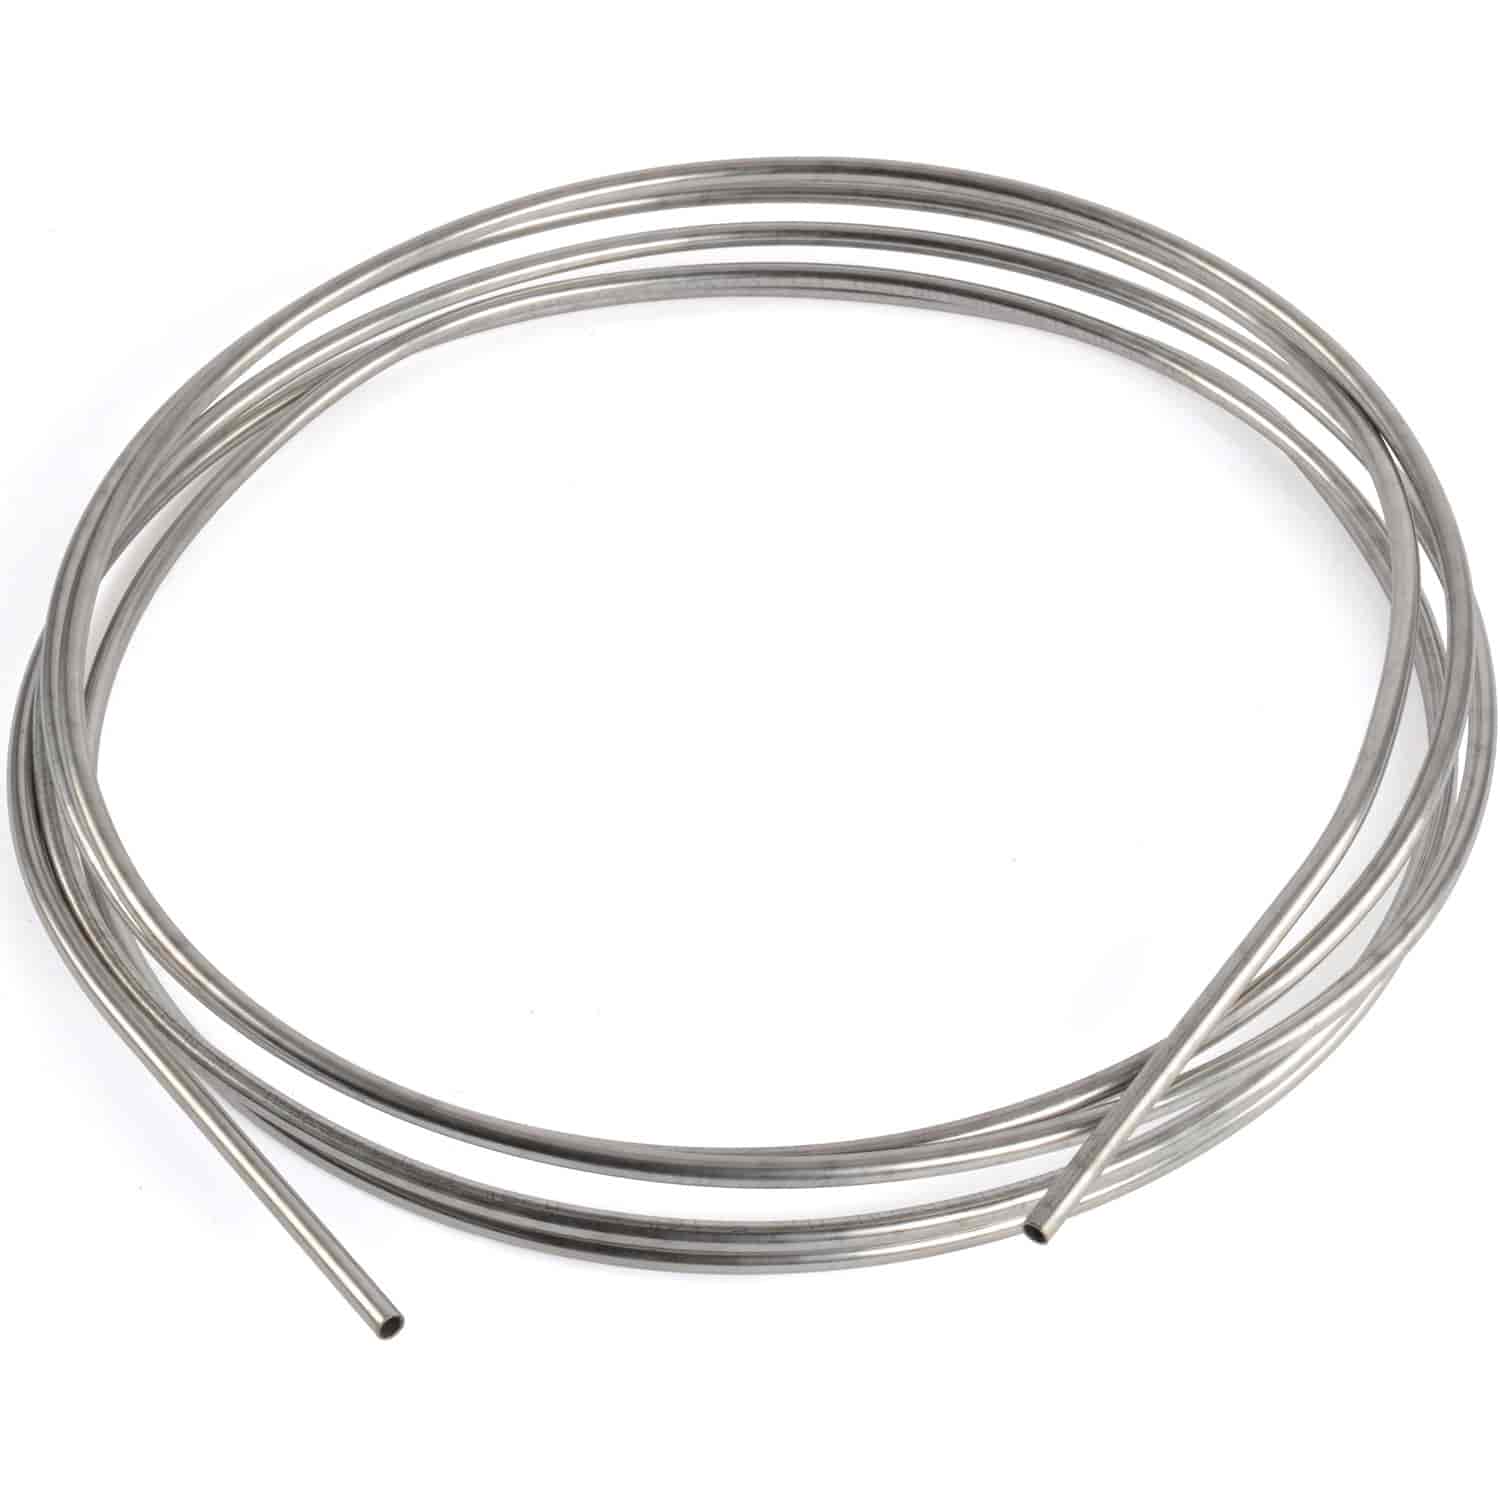 Stainless Steel Fuel Line Coil, 5/16 in. O.D.